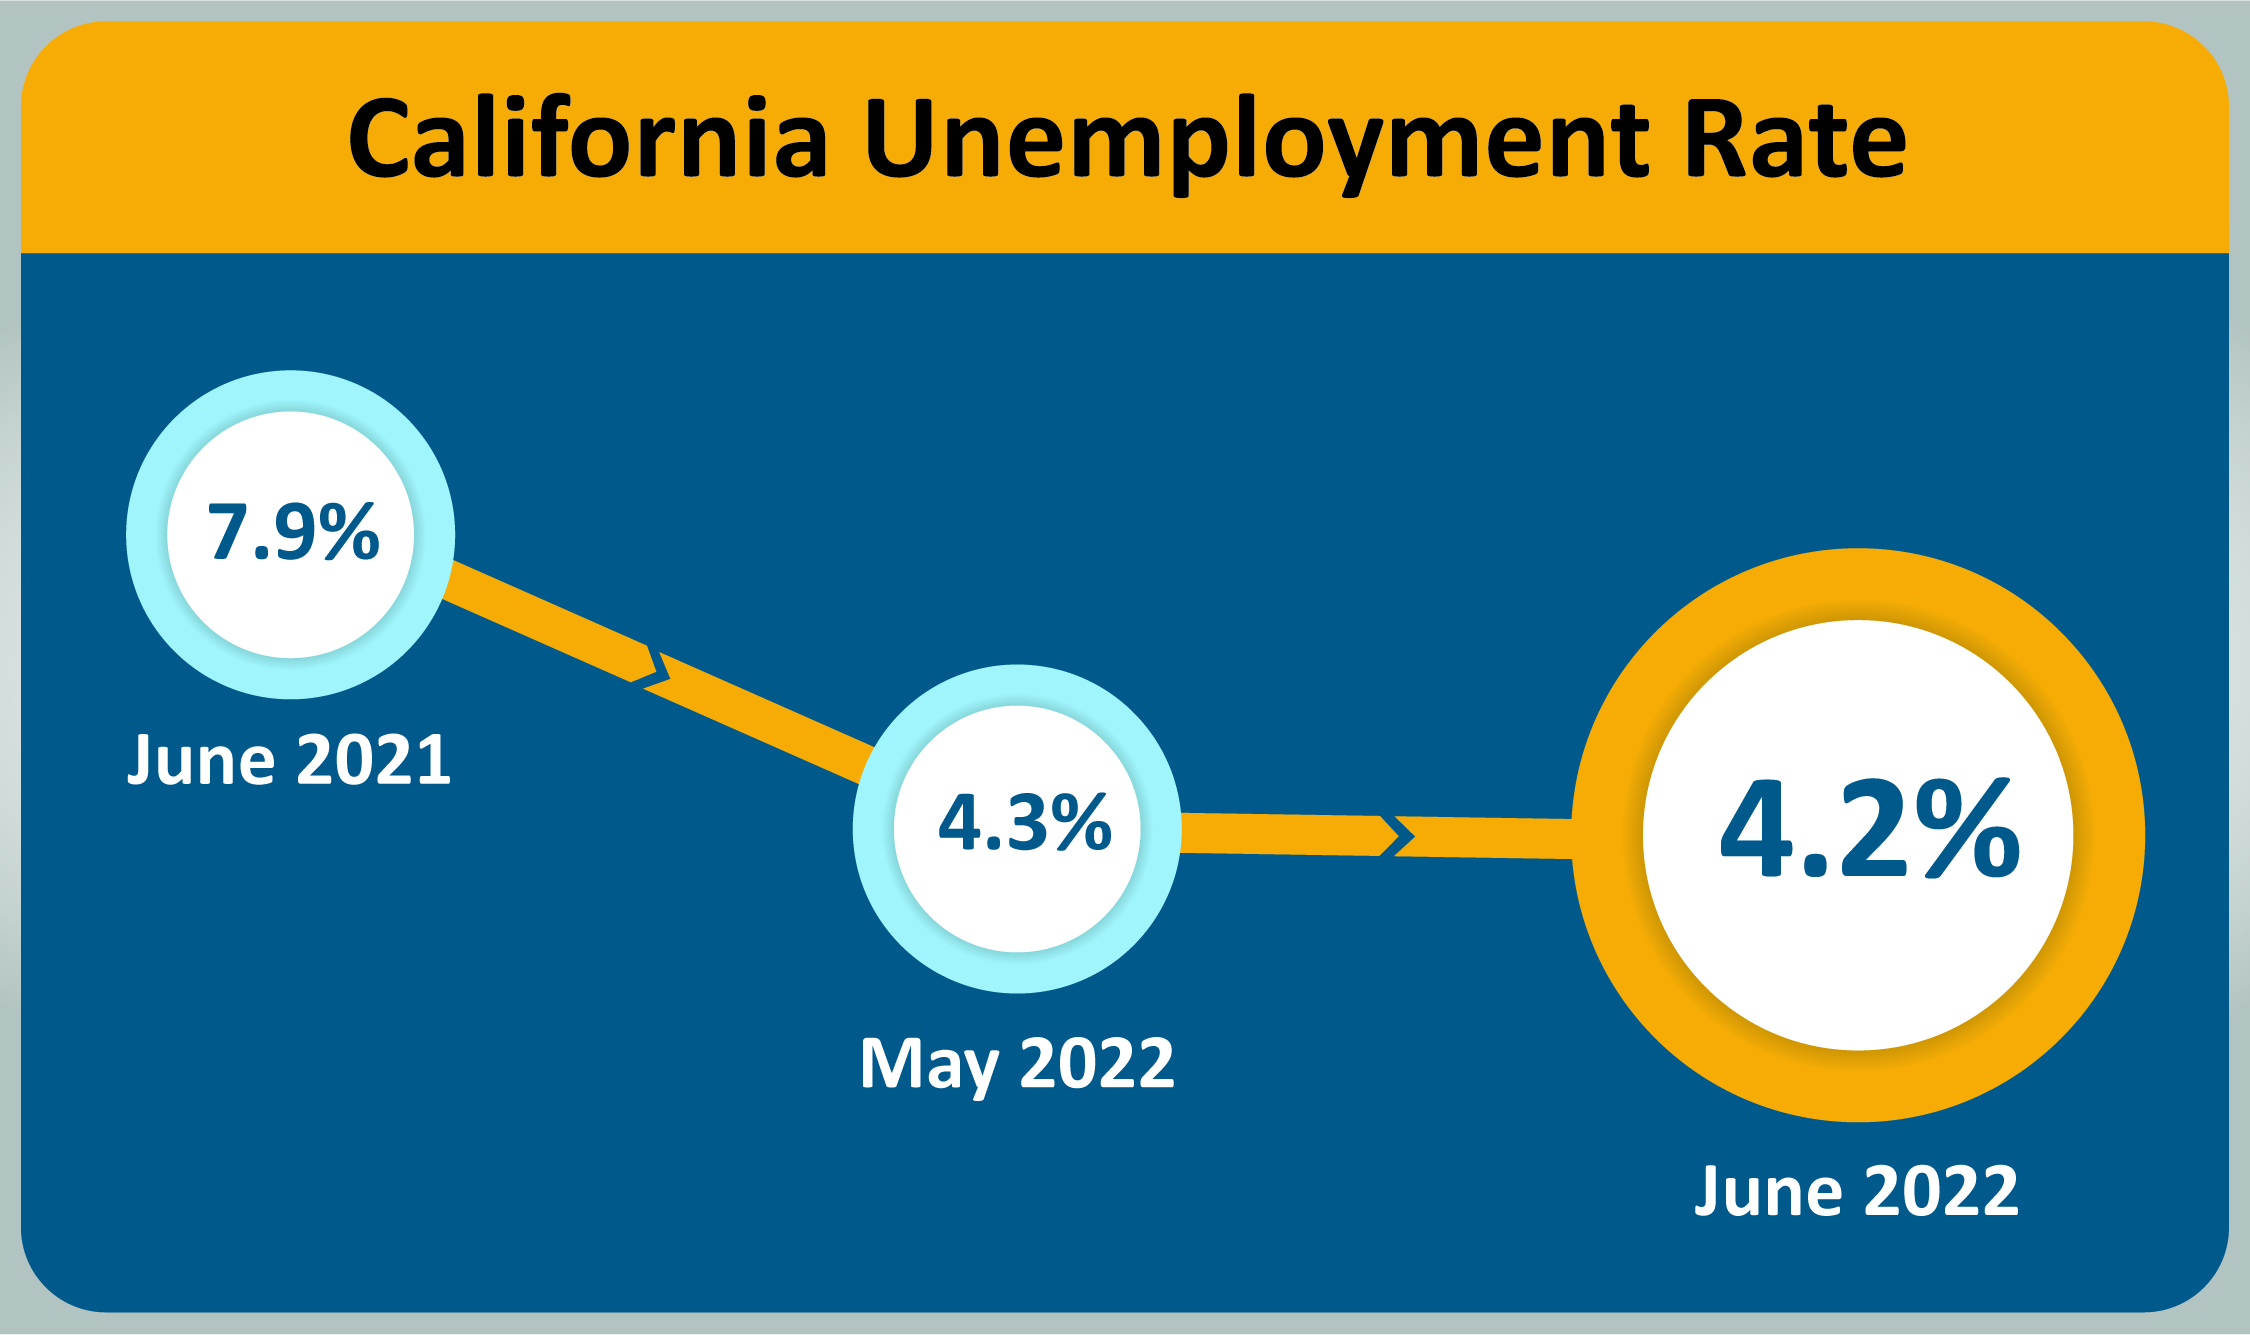 The California unemployment rate has dropped to 4.2 percent from 7.9 percent in June 2021